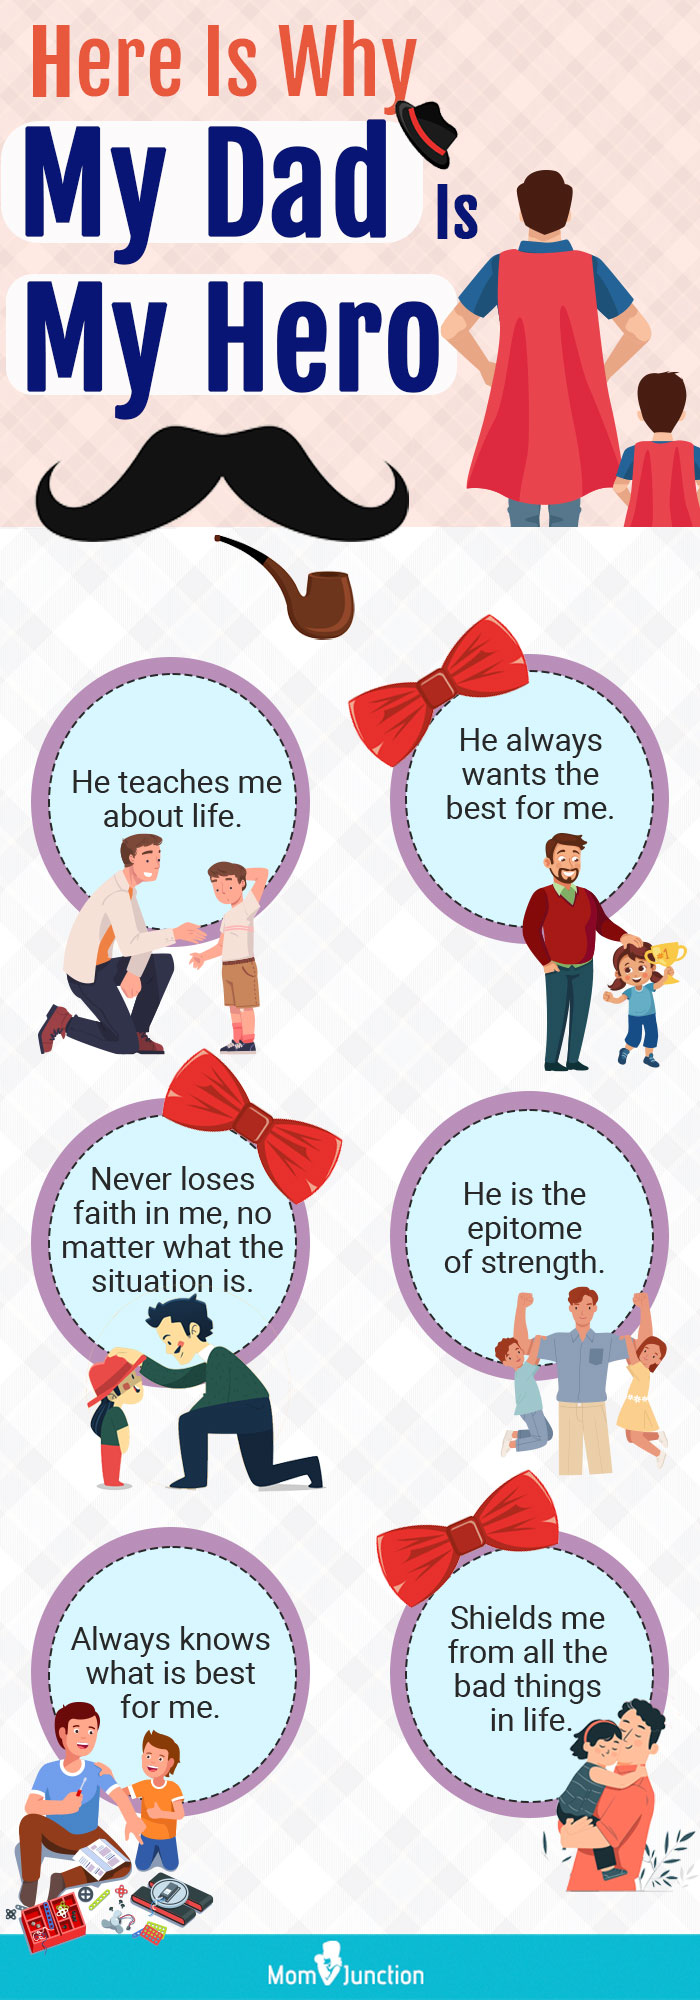 my dad is my hero (infographic)